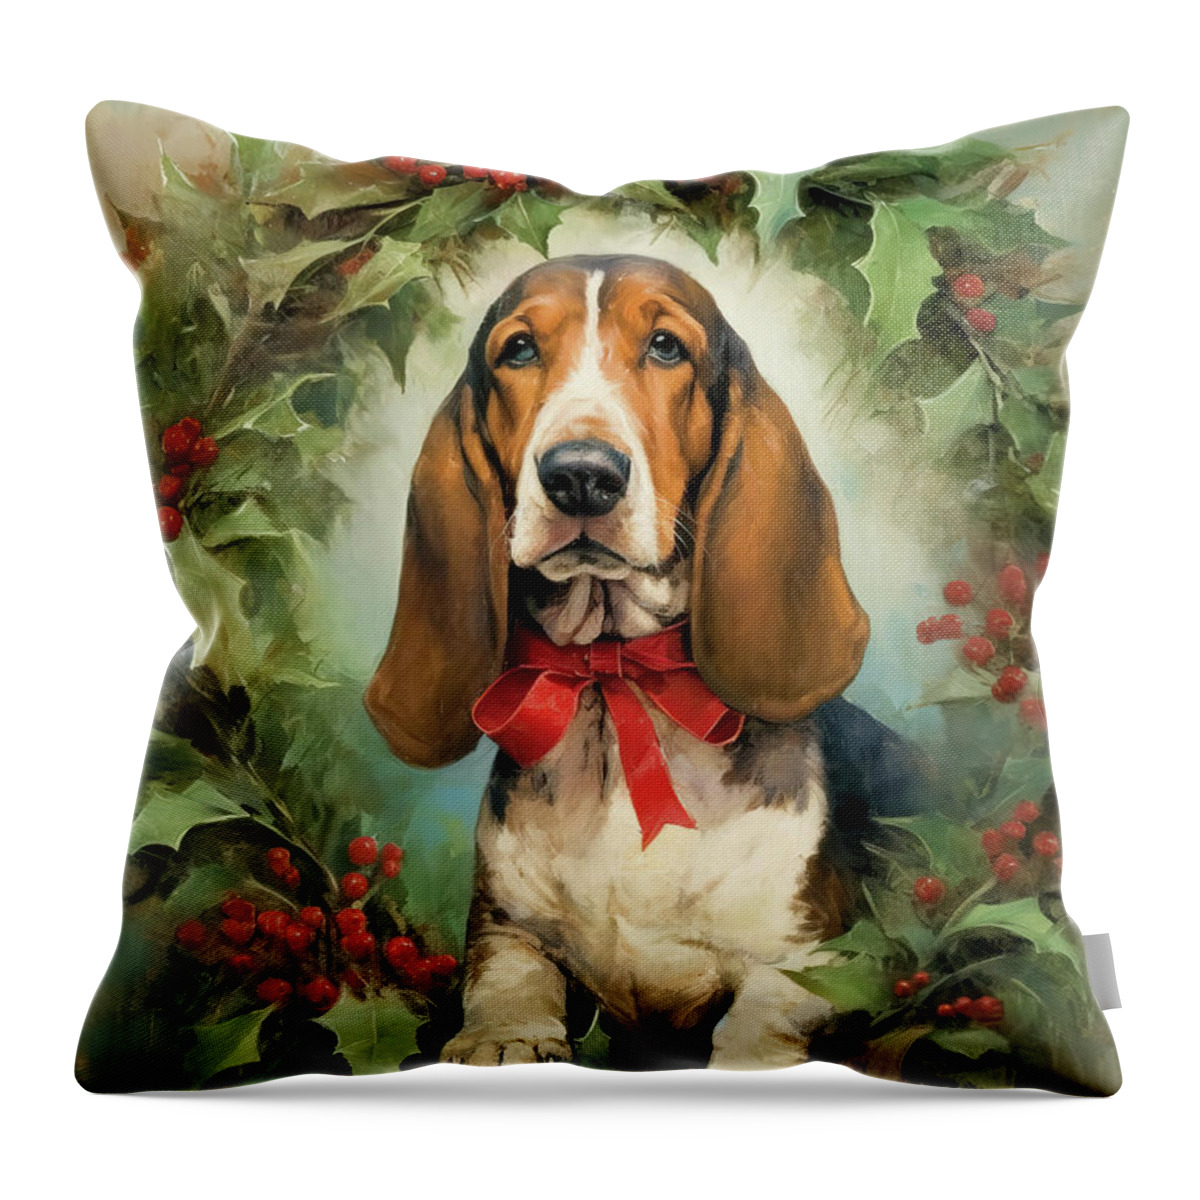 Basset Hound Throw Pillow featuring the painting The Christmas Hound by Tina LeCour